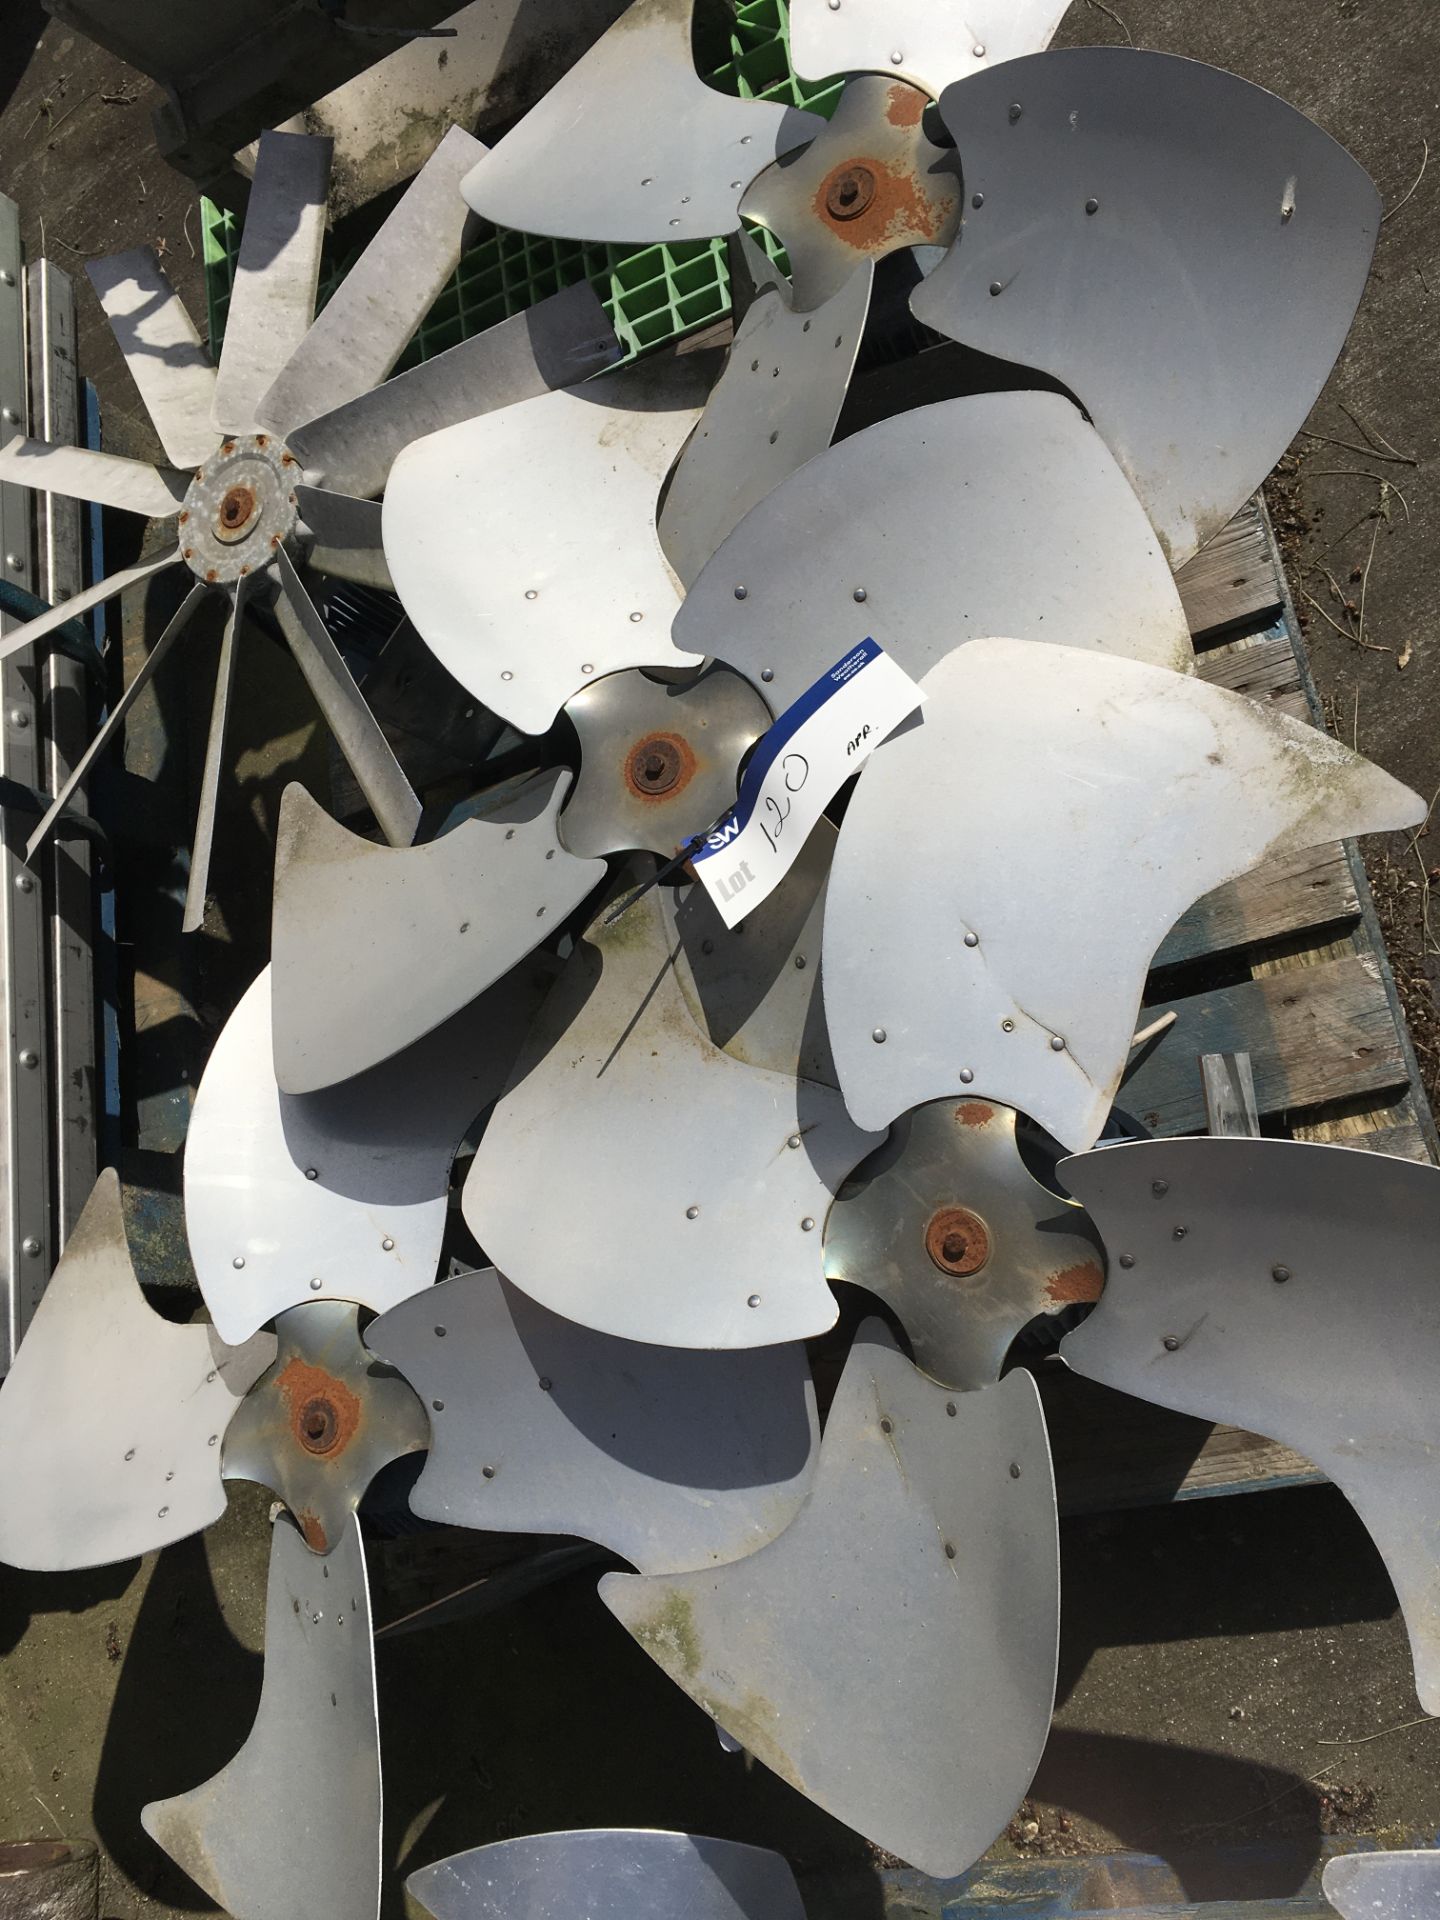 Five Fans, three phase, serial no. N/A, plant no. N/A, year of manufacture N/A, dimensions